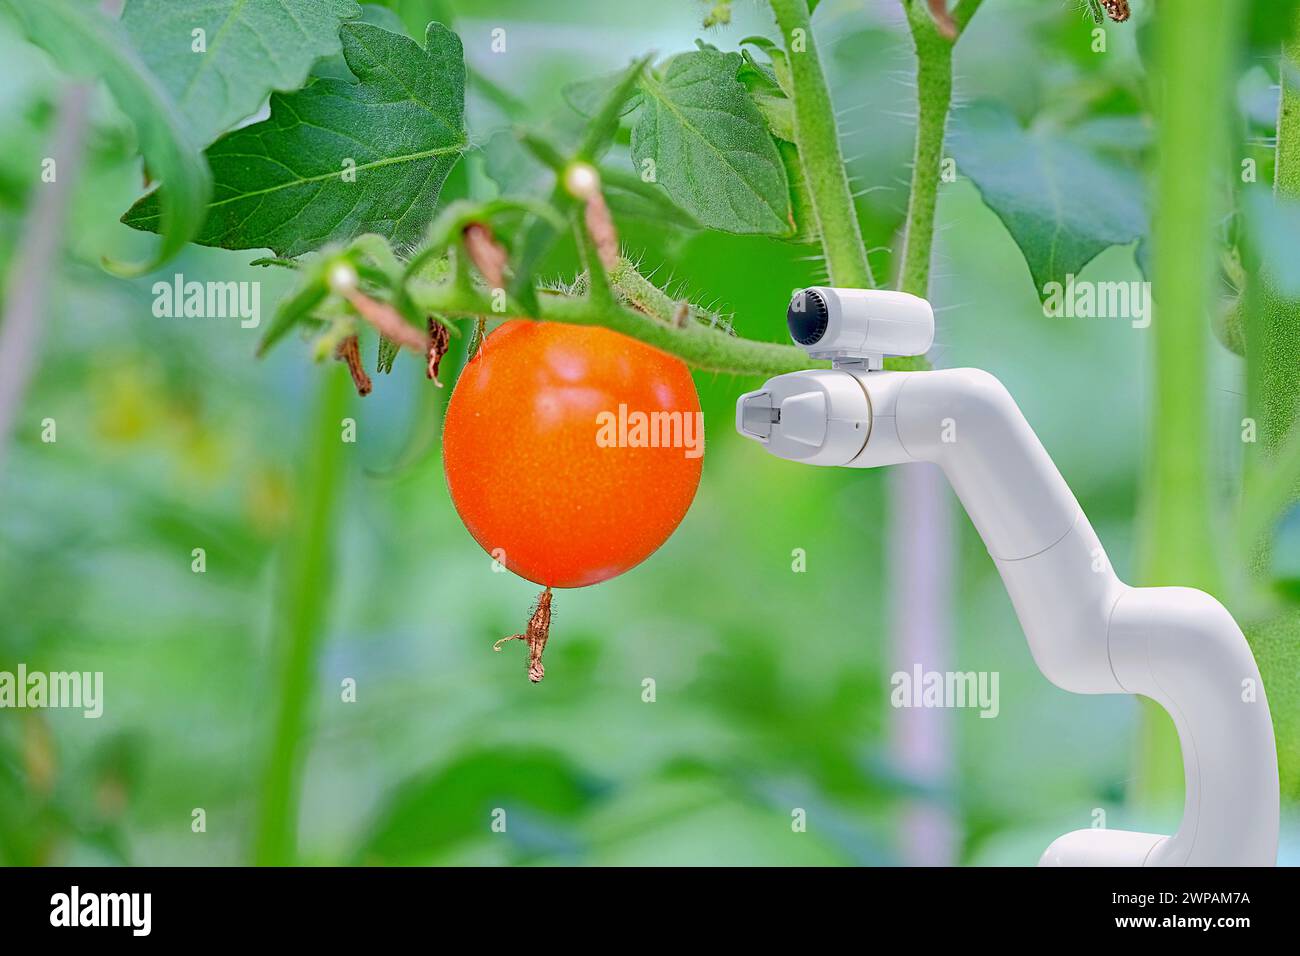 Smart robotic that installed on Tomato garden for assist farmer to work and harvest product, smart farm 4.0 concept Stock Photo